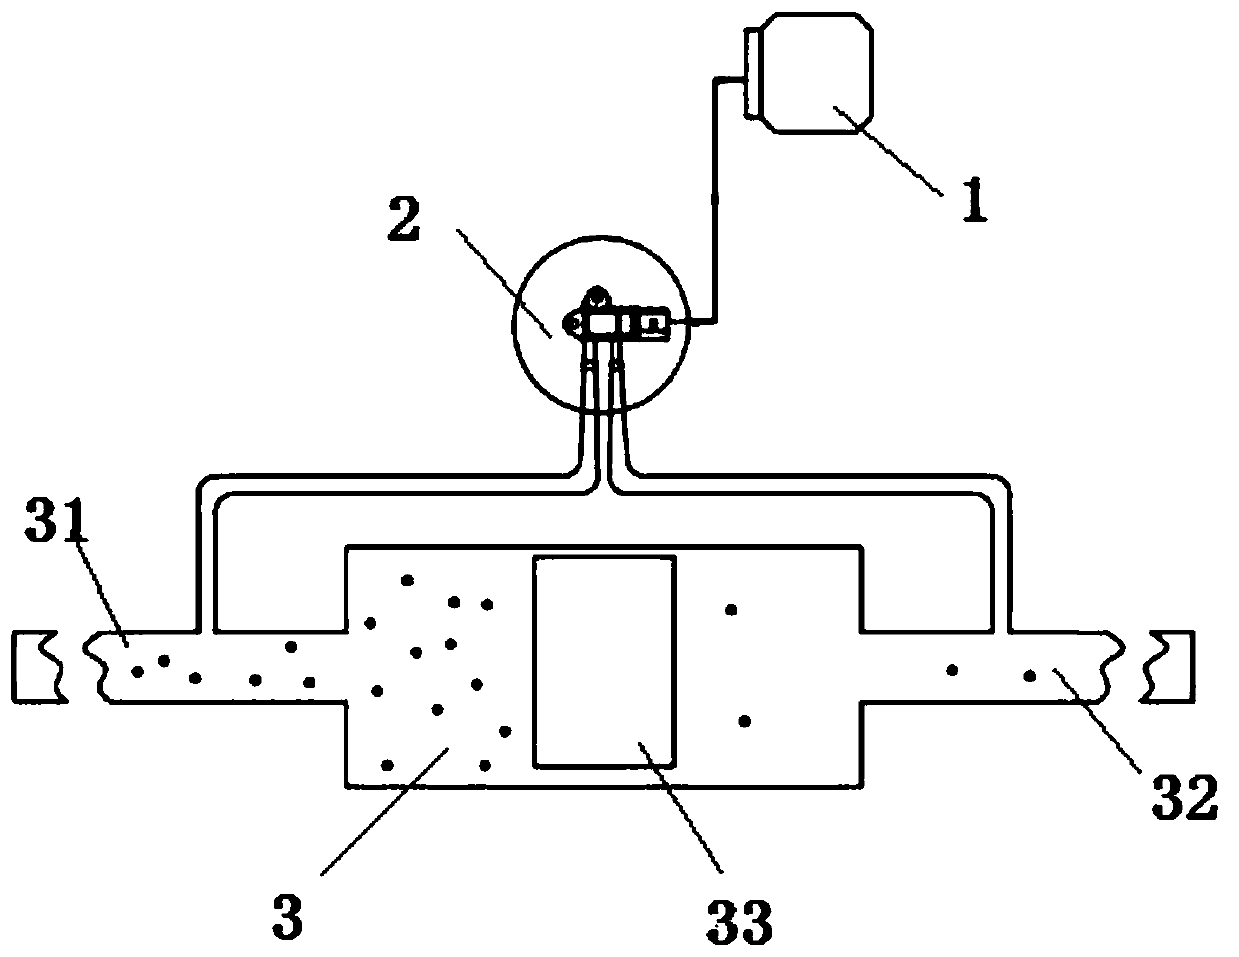 Testing method for plugging of vehicle three-filtering system based on pressure sensor